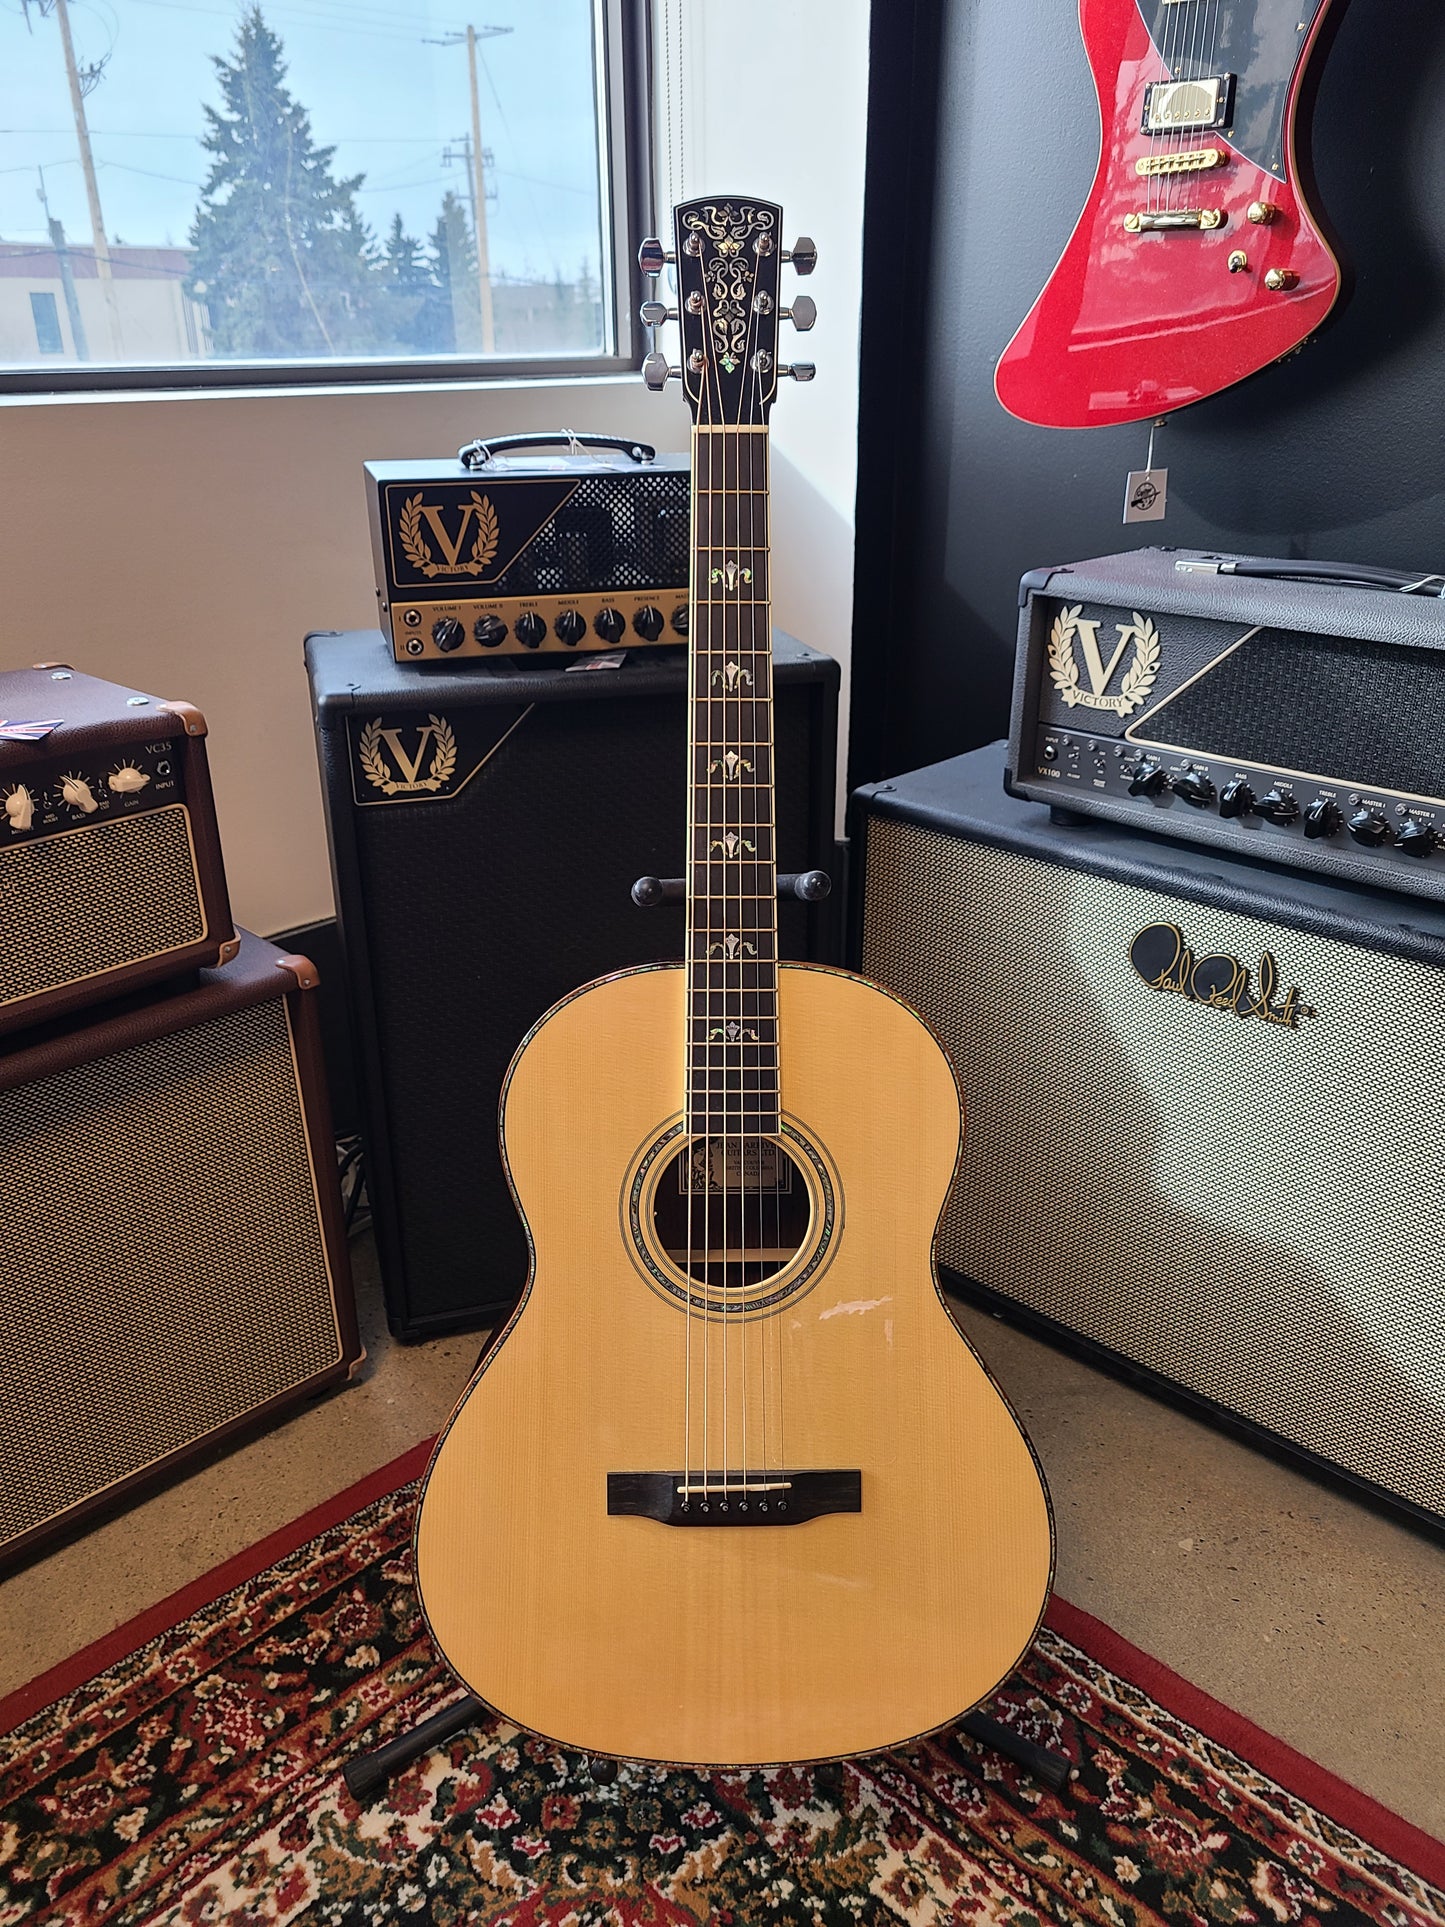 USED 1998 Larrivee L-10 Deluxe Electric Acoustic